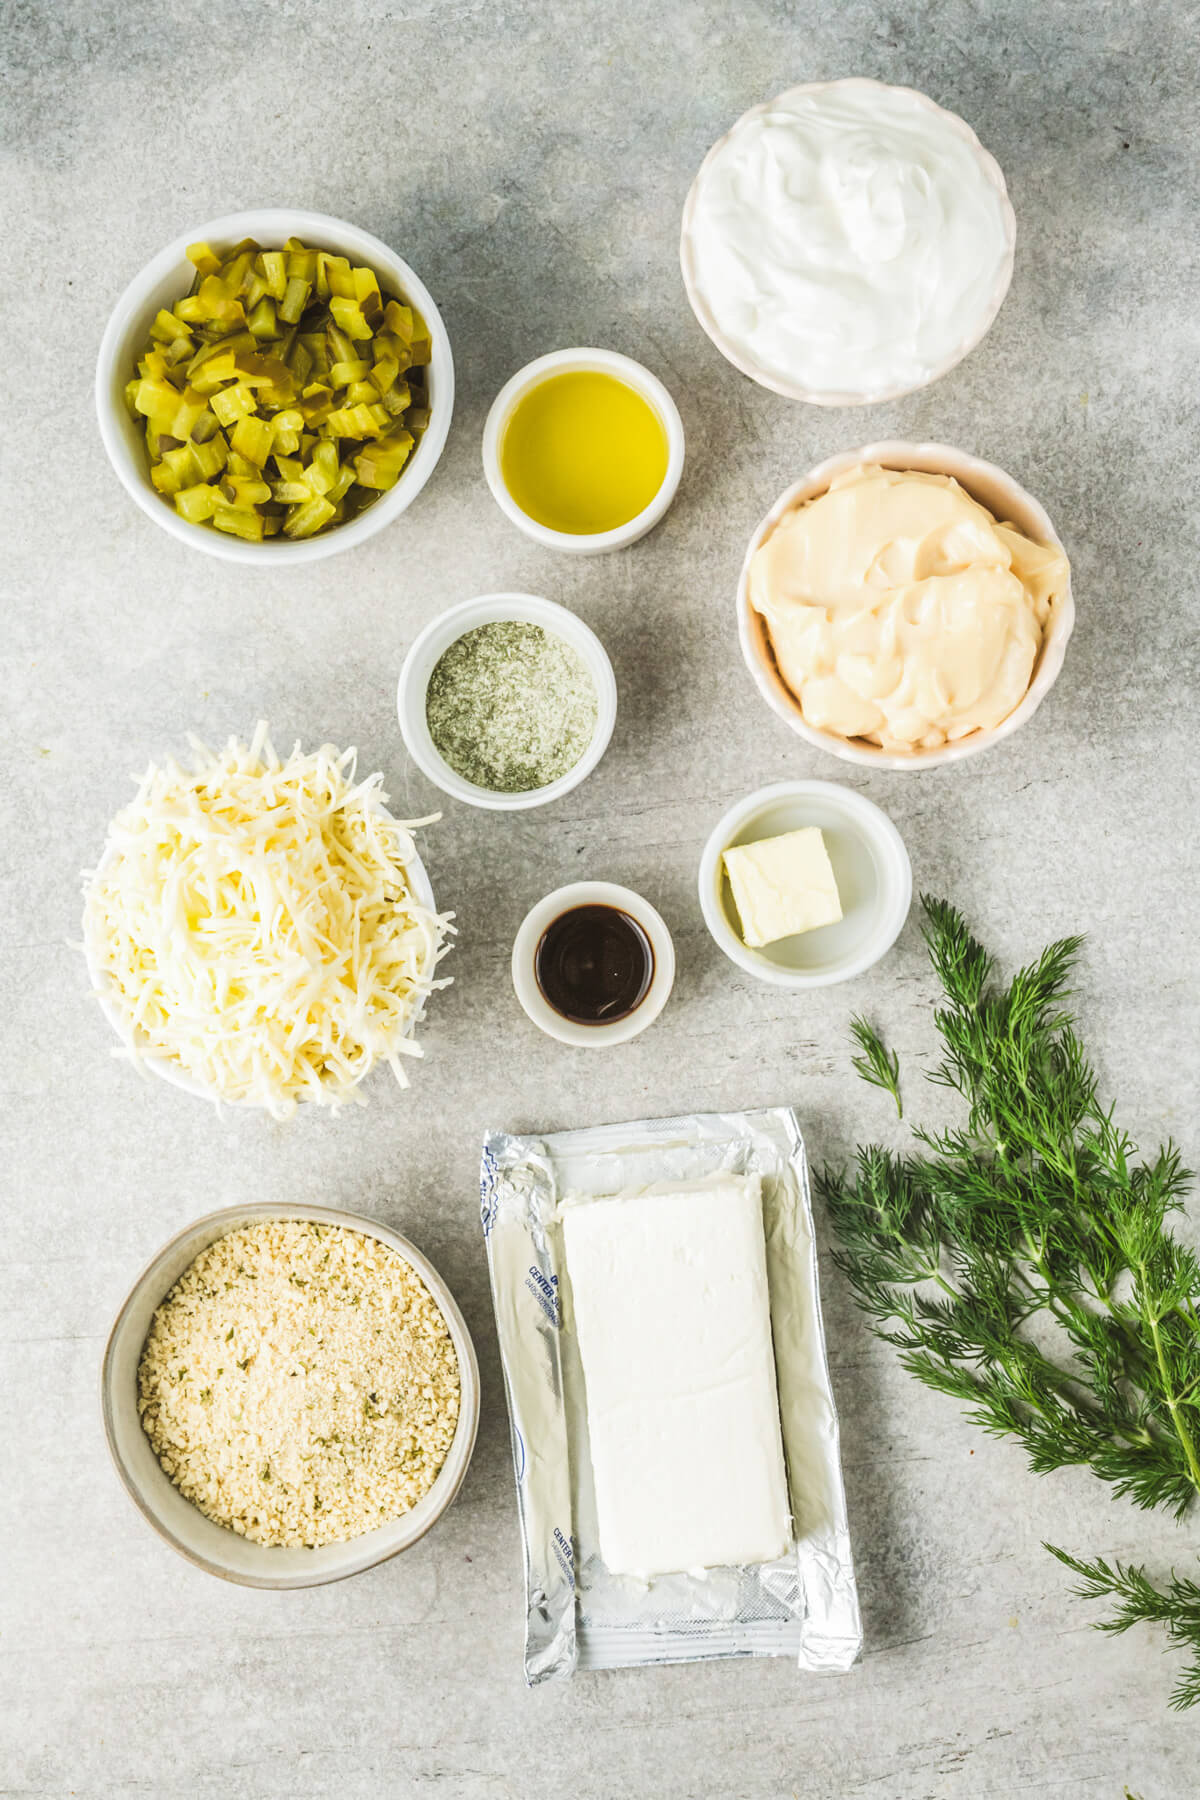 Ingredients required to make dill pickle dip with a crispy panko crumb topping.